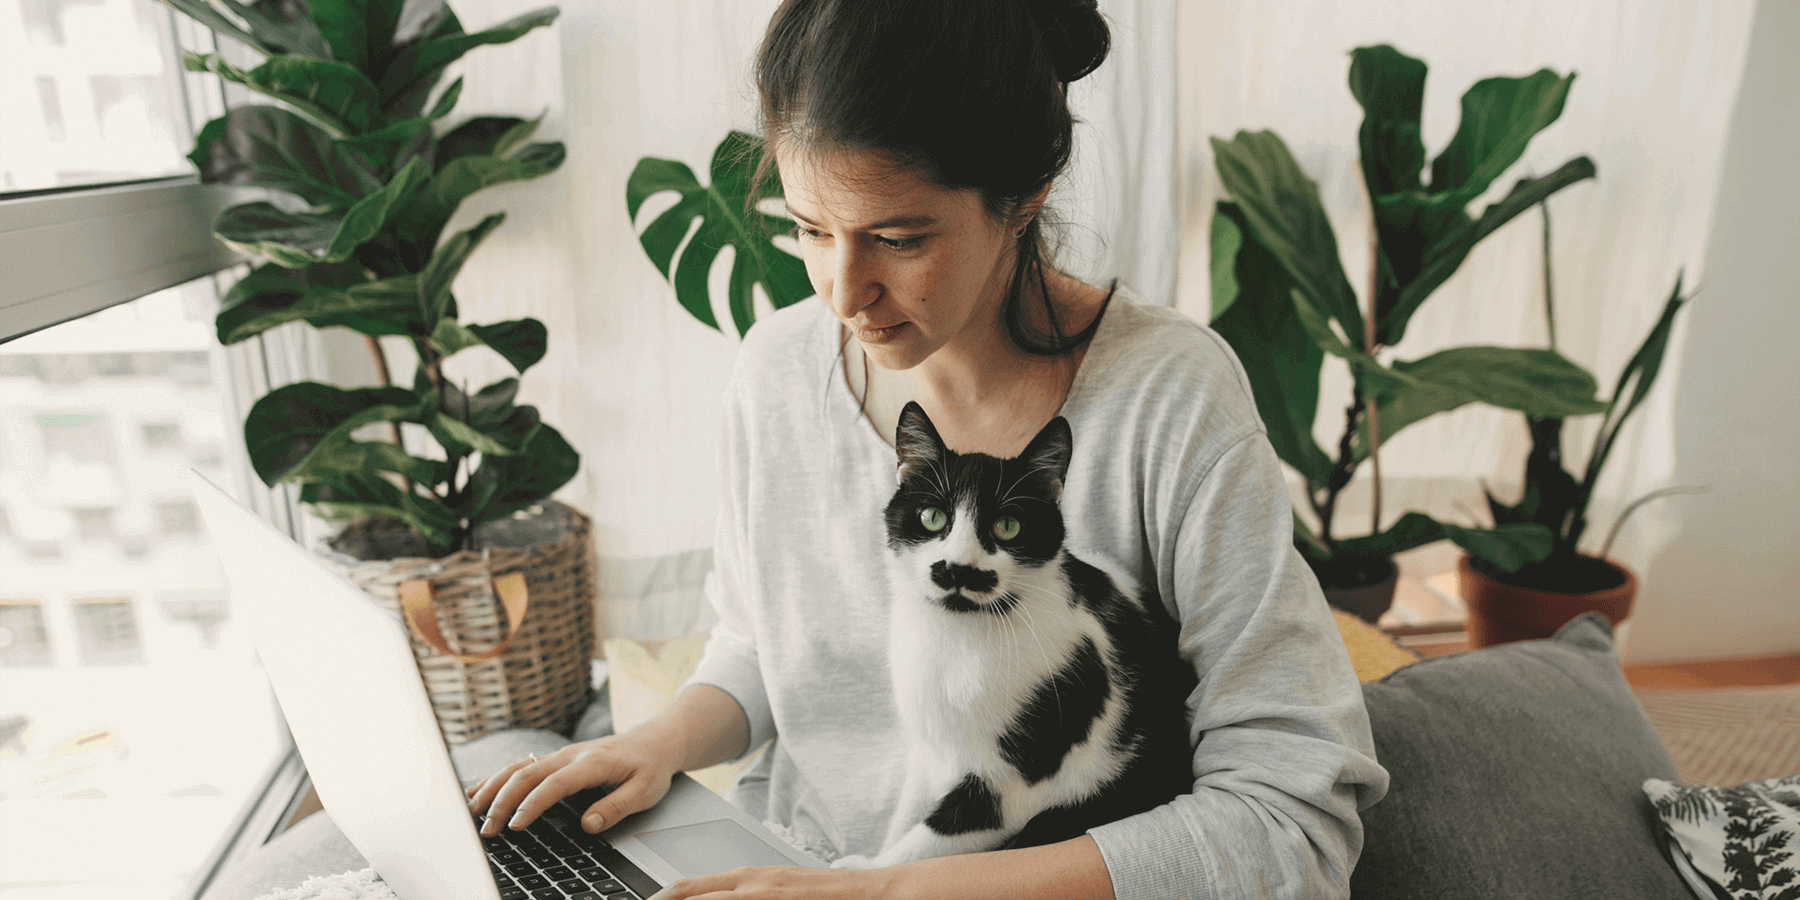 Woman with a cat on her lap researching "How Long Does It Take For Antibiotics To Work?" on her laptop.